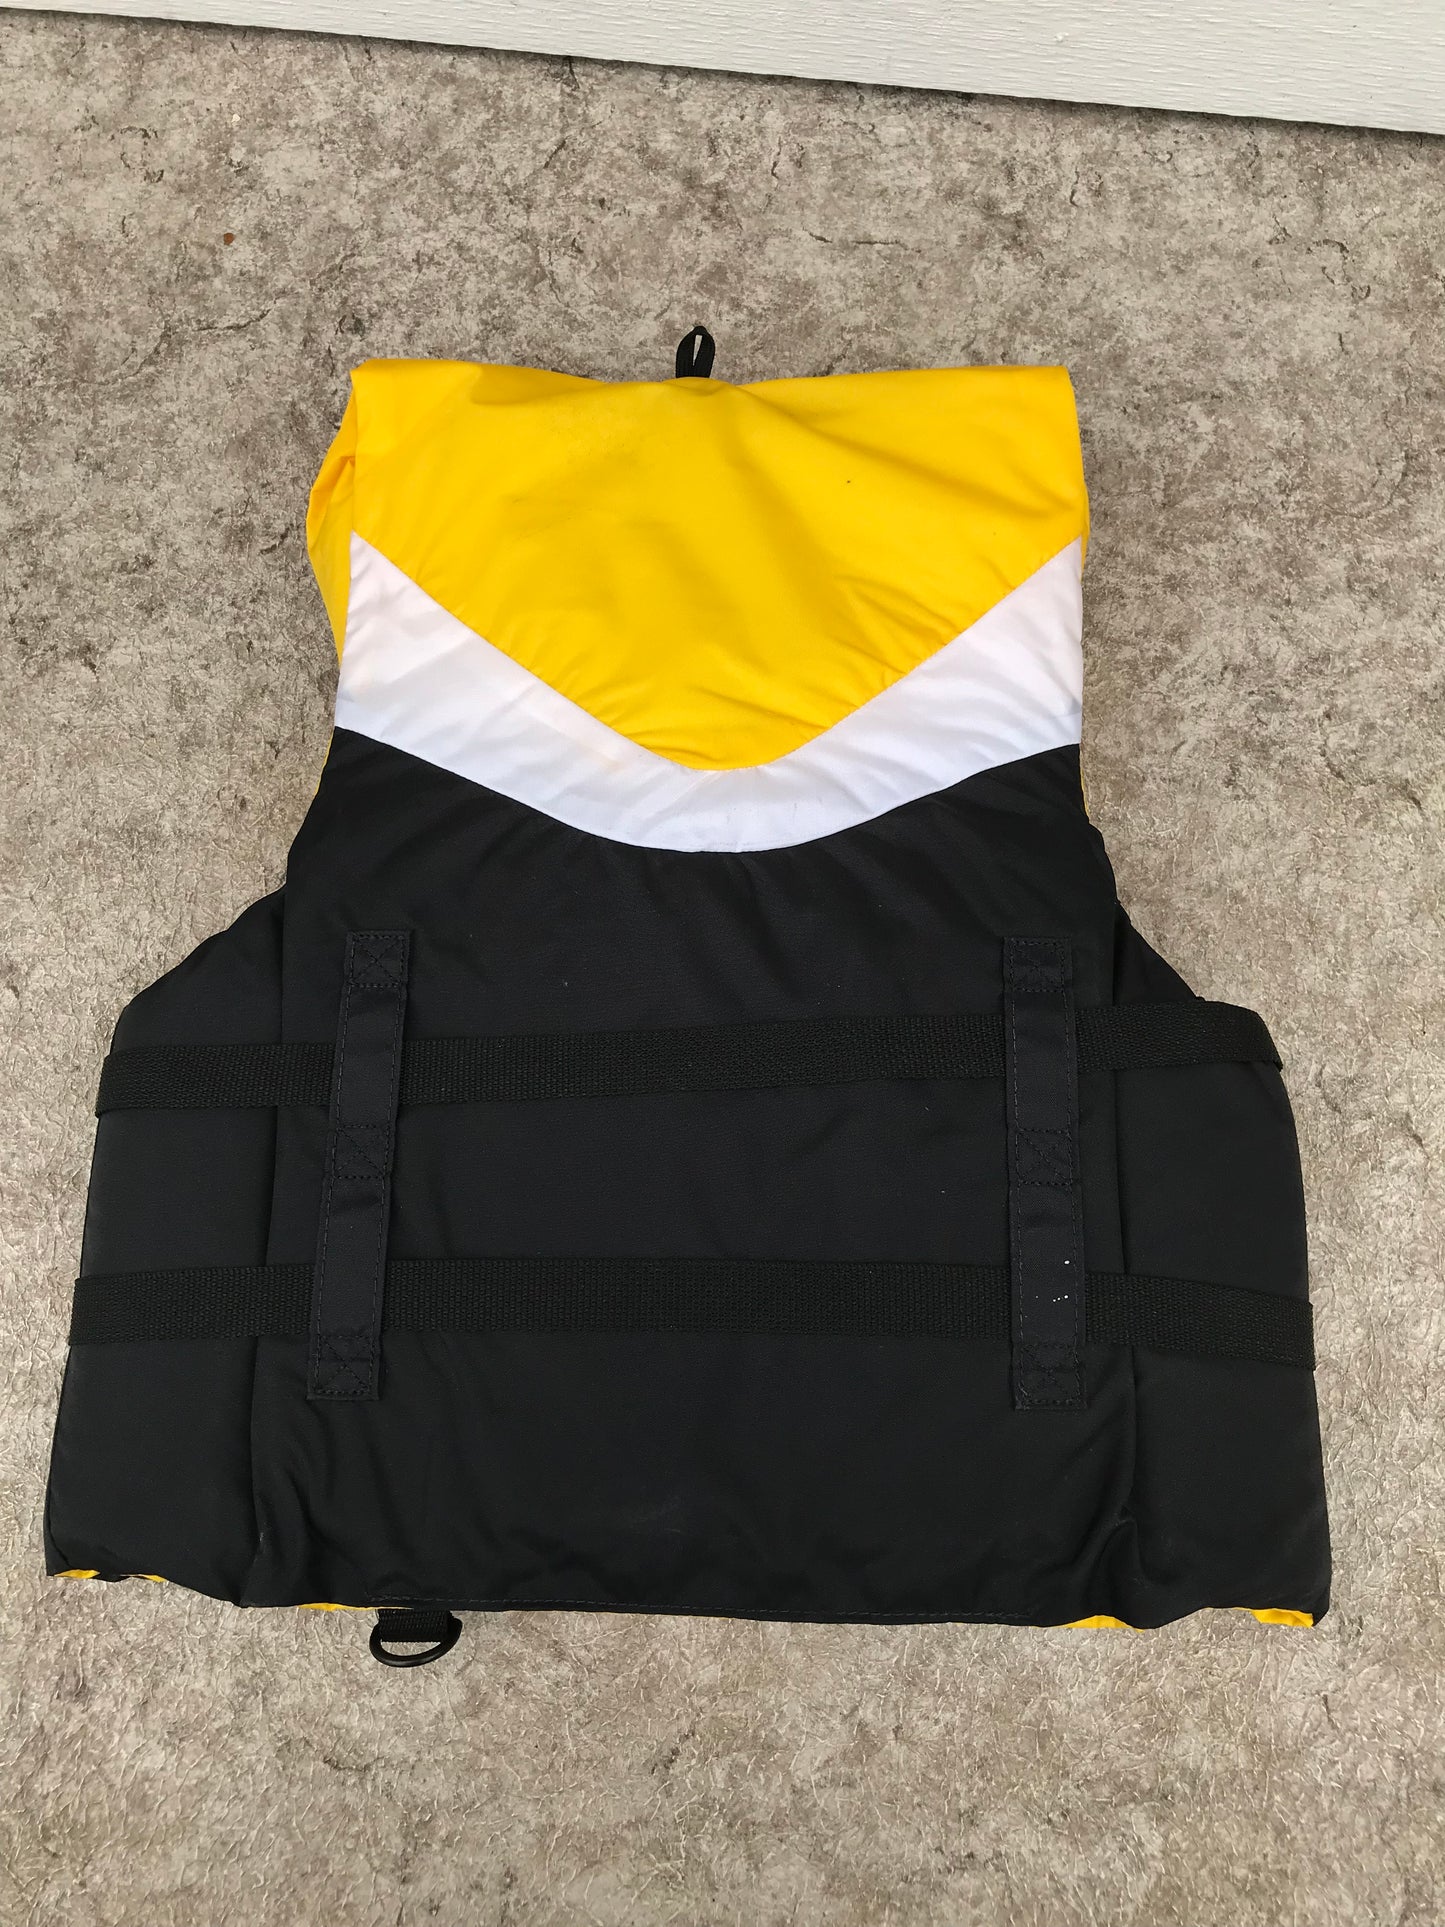 Life Jacket Adult Size Small Fluid Black Yellow New Demo Model